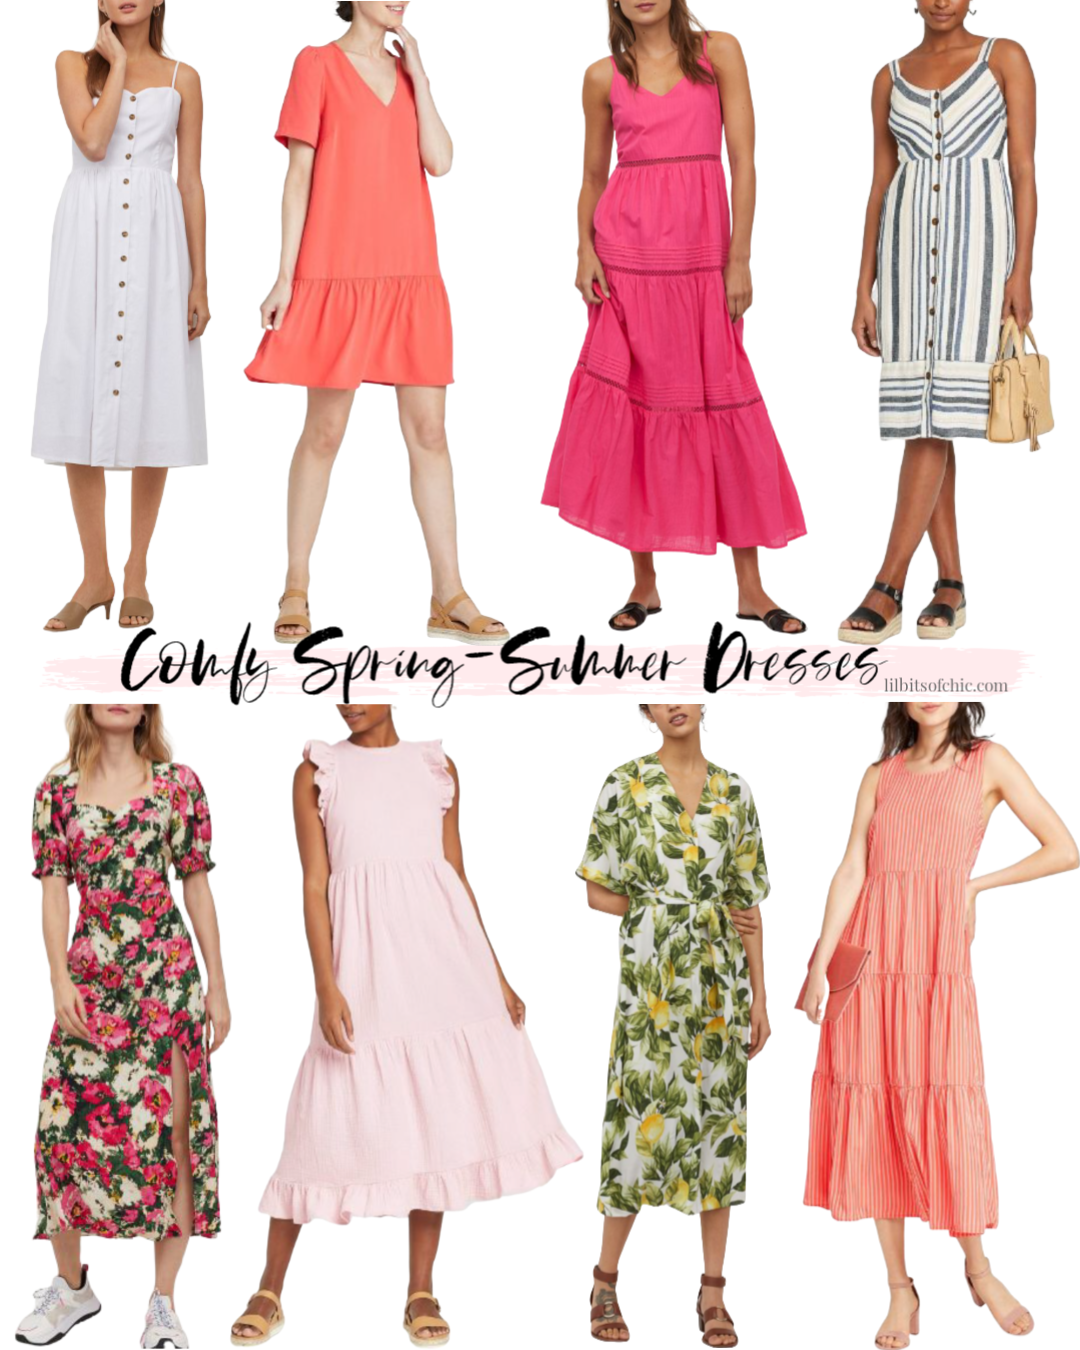 Comfy Spring Dresses you can wear at home